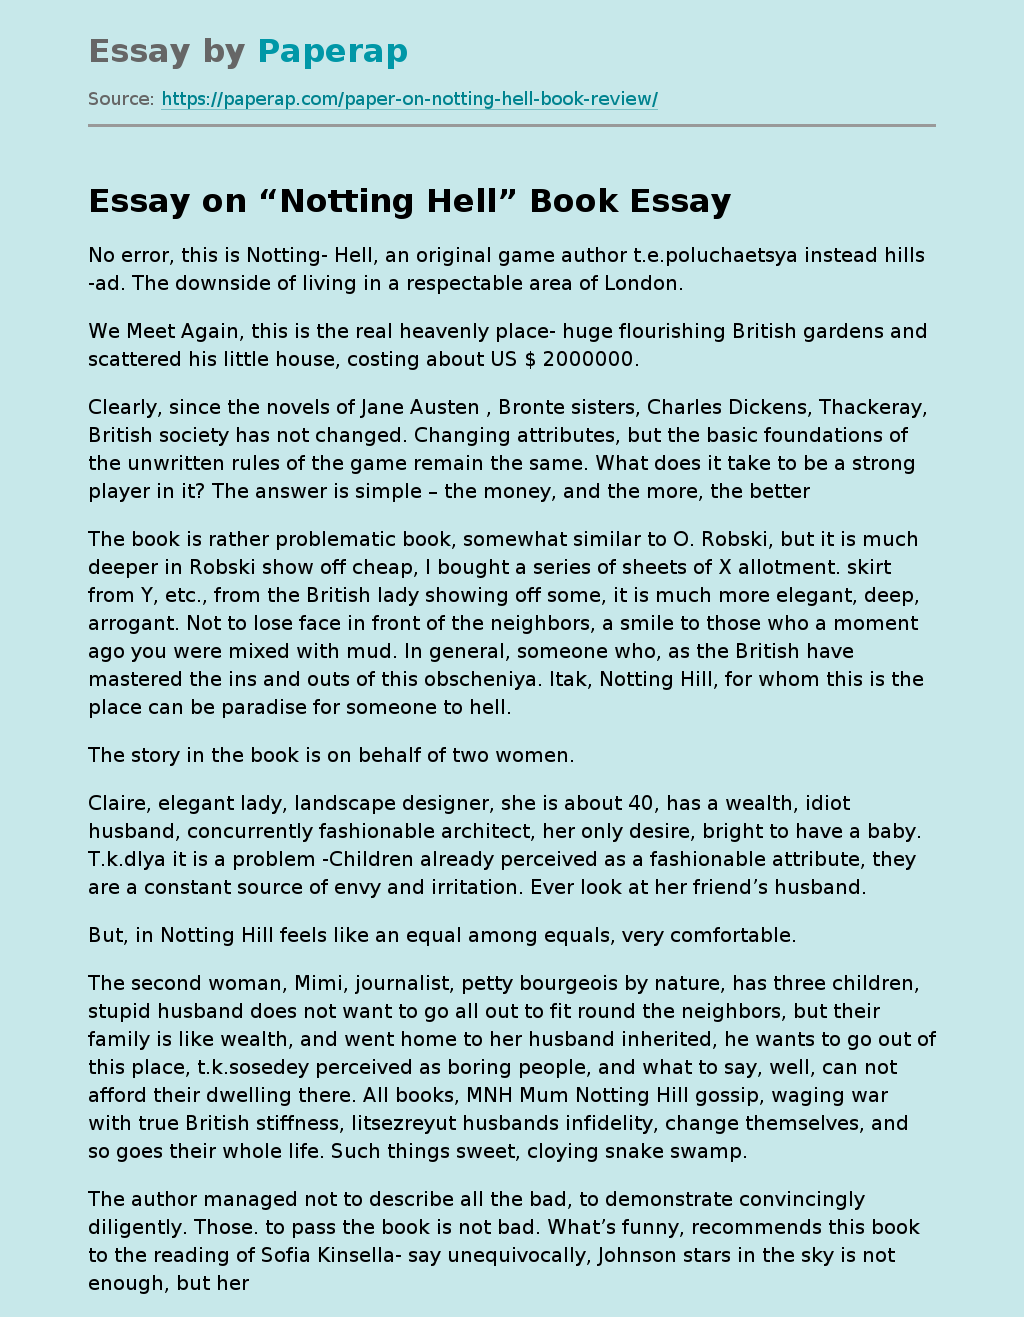 Essay on “Notting Hell” Book